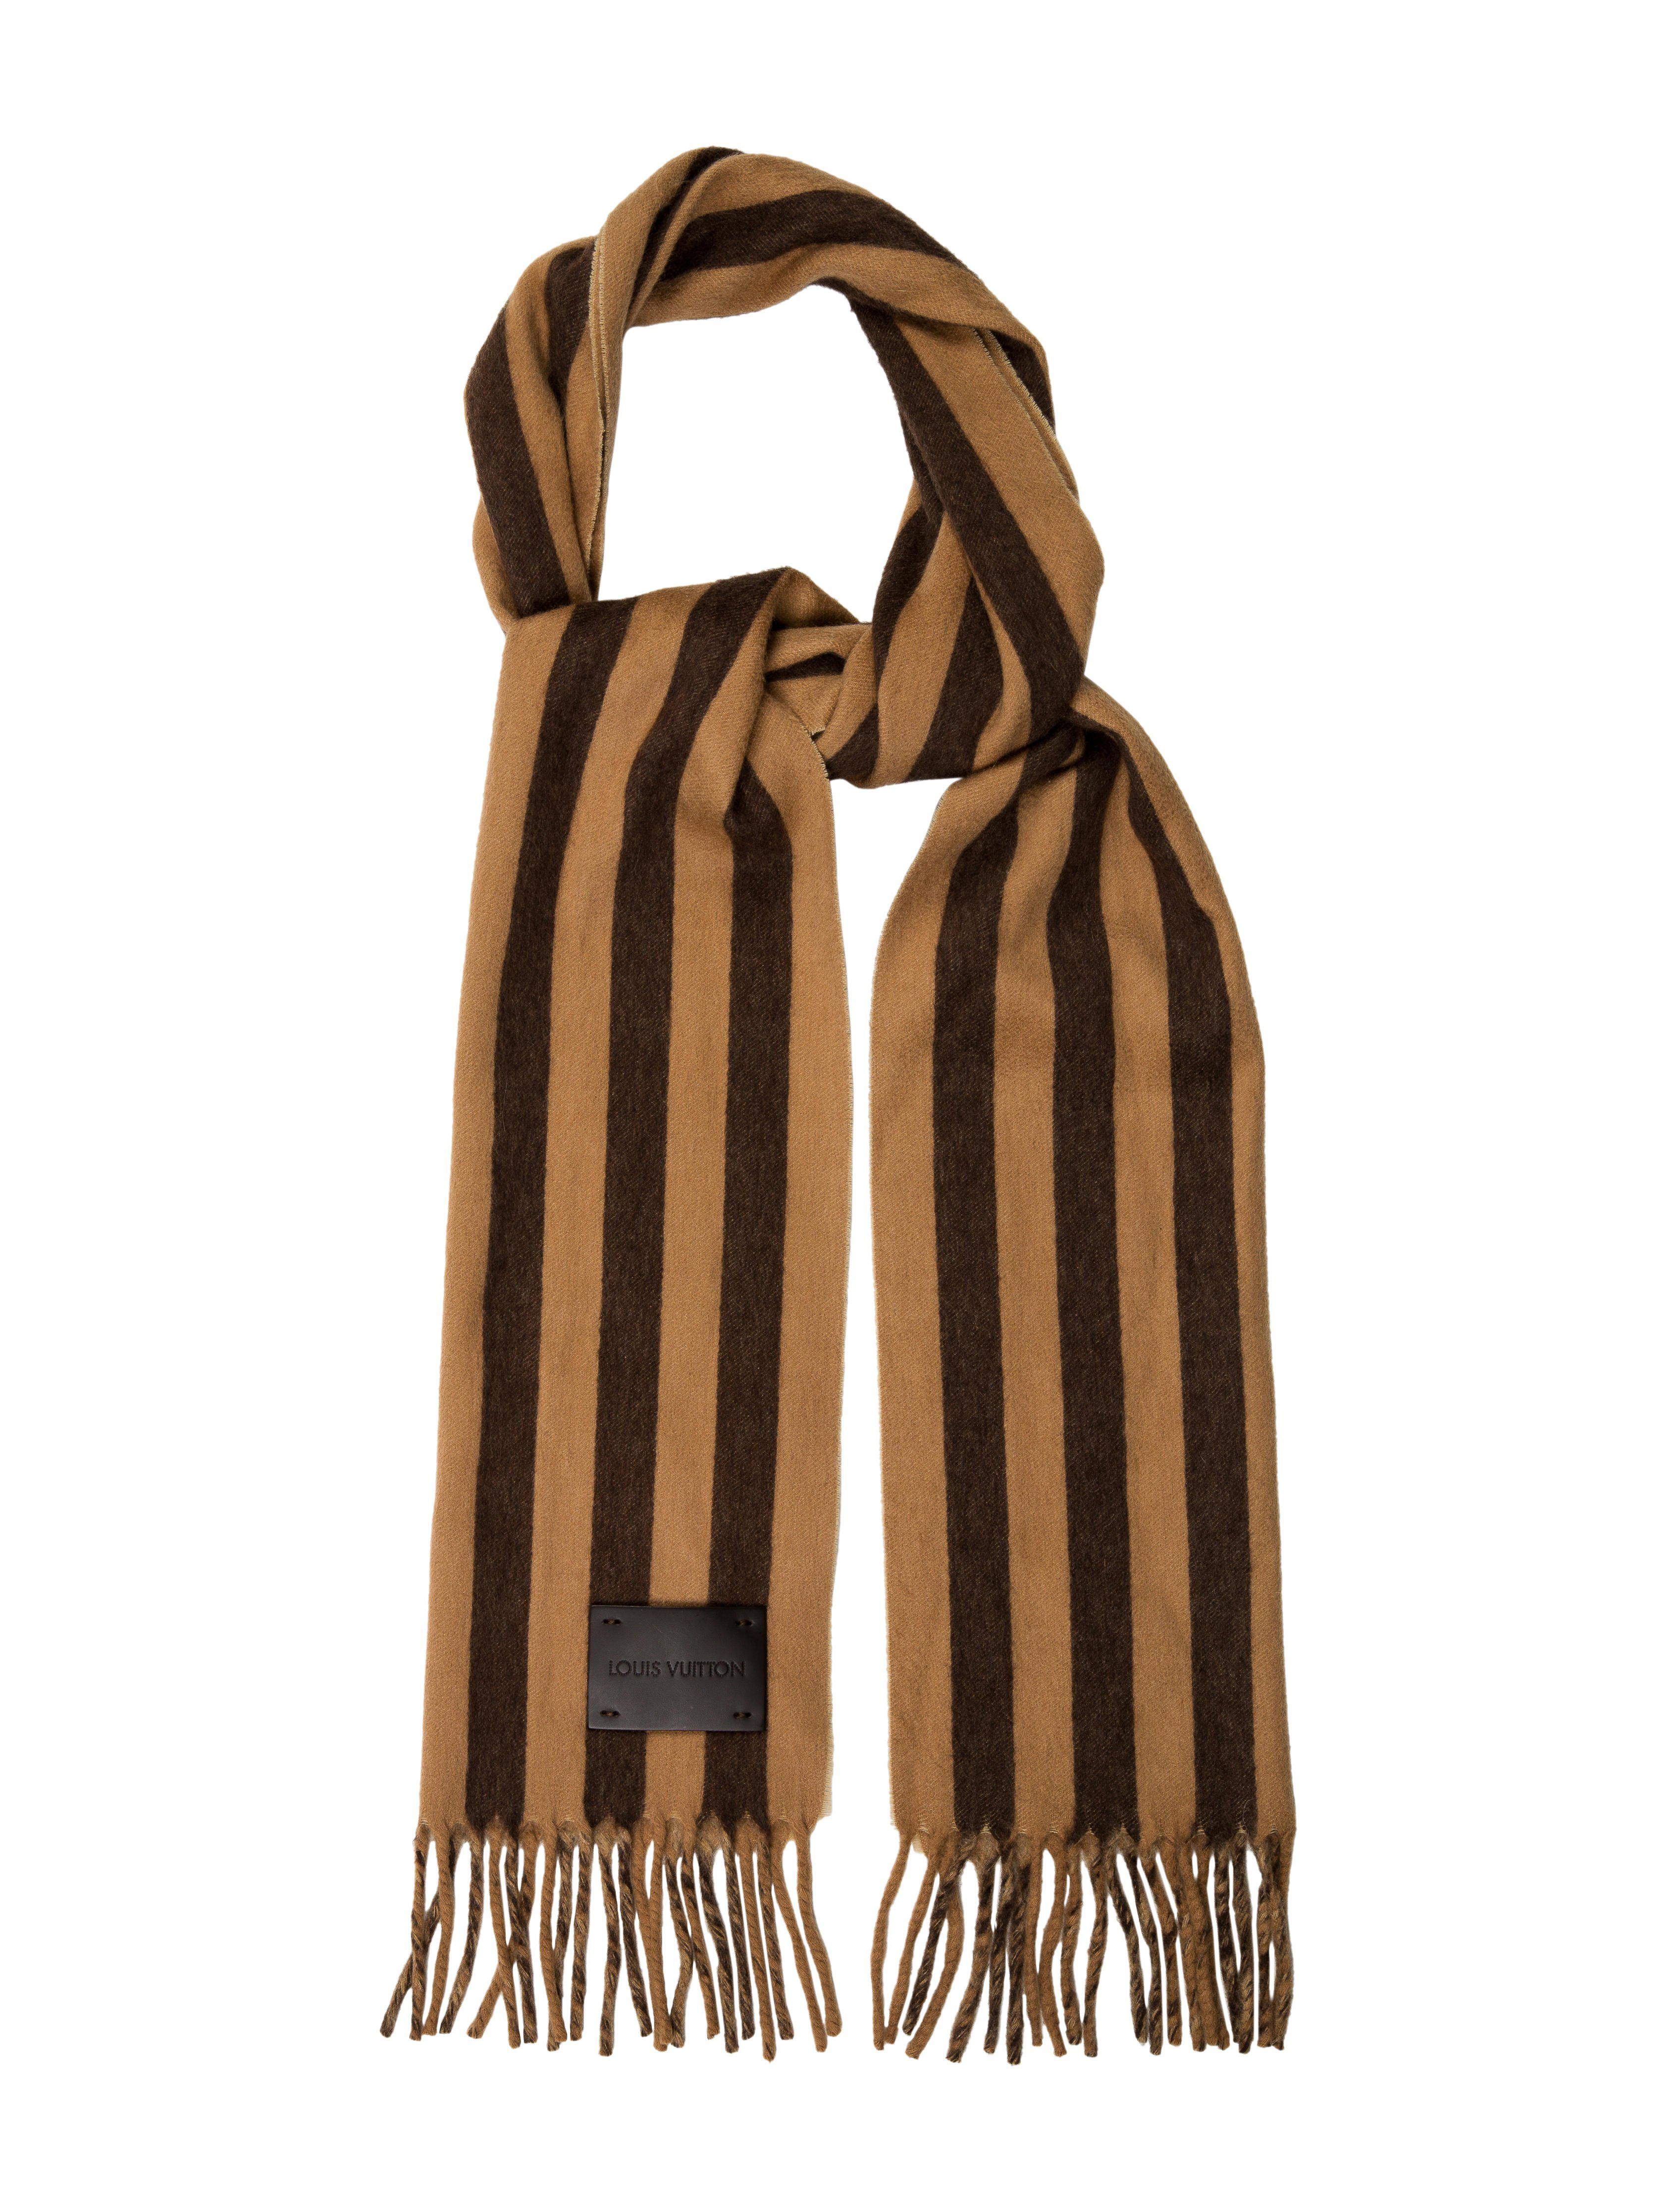 Lyst - Louis vuitton Striped Cashmere Scarf Tan in Natural